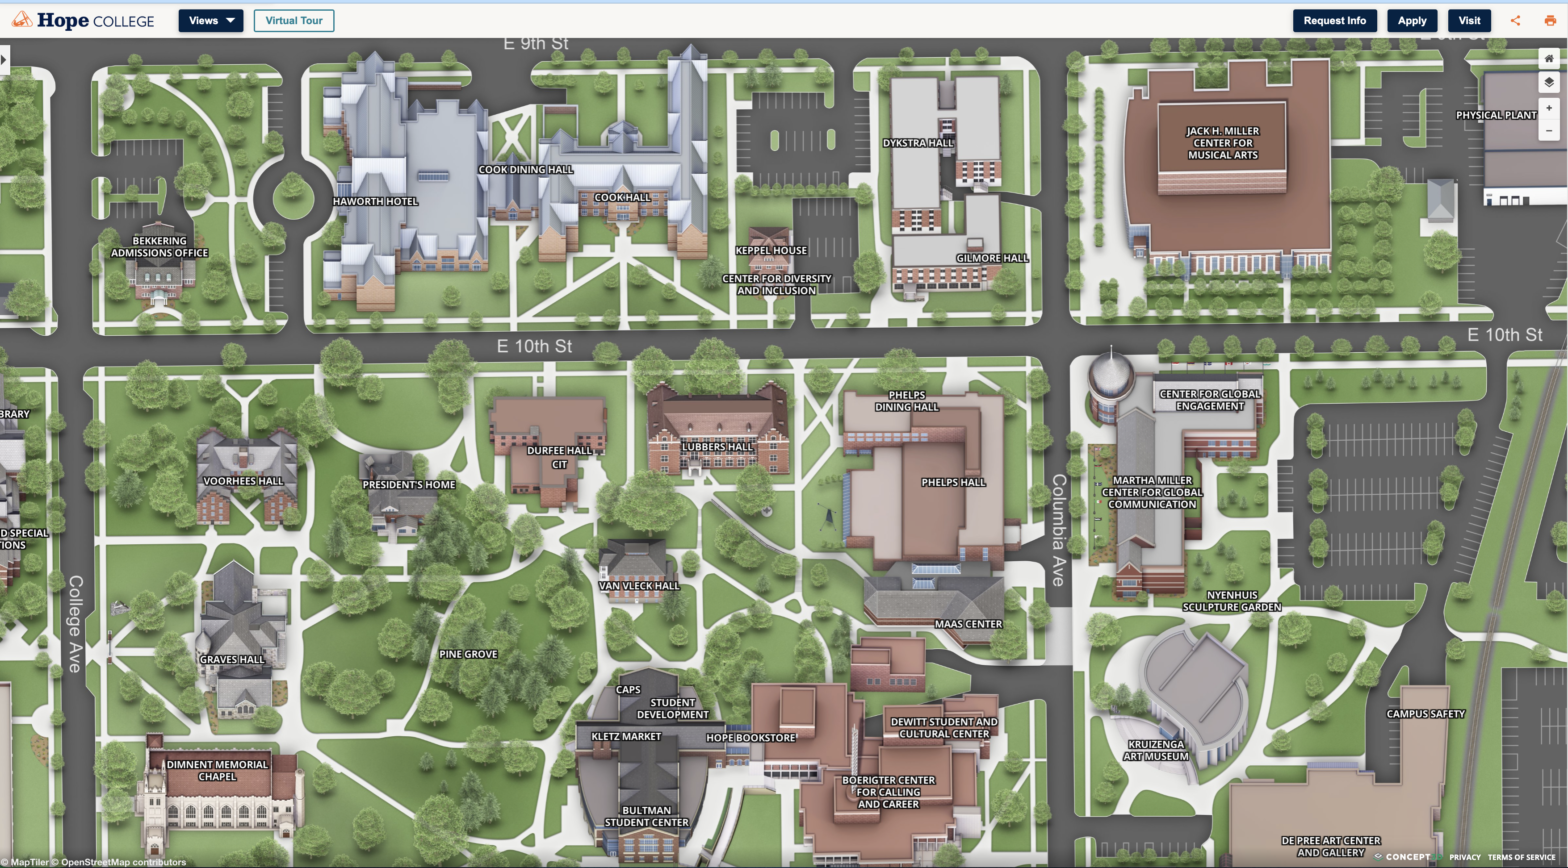 Screenshot of the Hope College online map